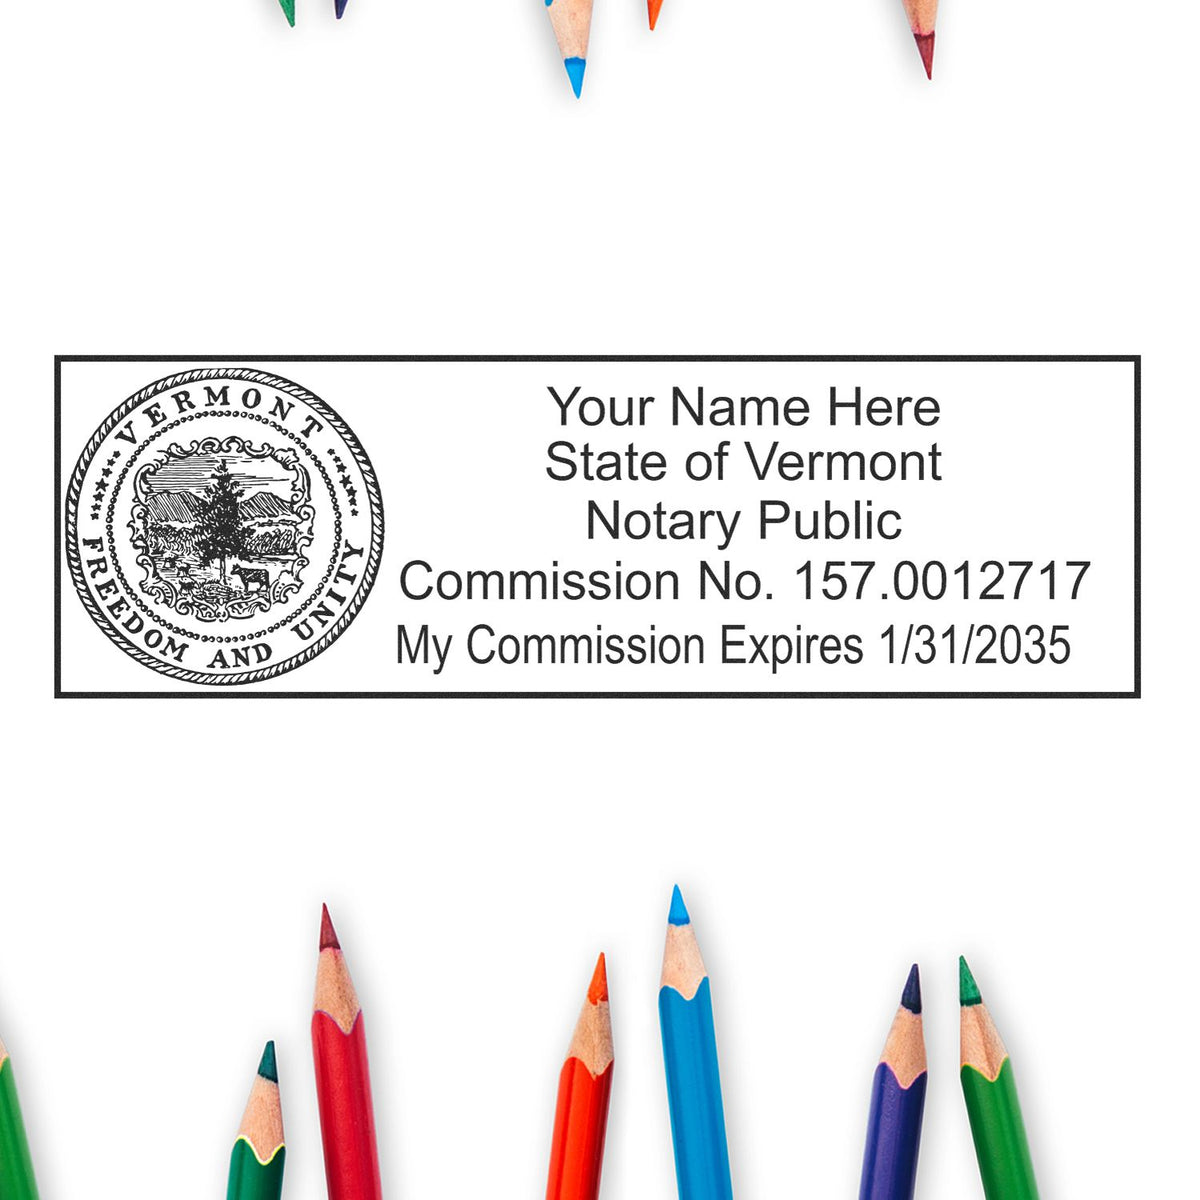 The Slim Pre-Inked State Seal Notary Stamp for Vermont stamp impression comes to life with a crisp, detailed photo on paper - showcasing true professional quality.